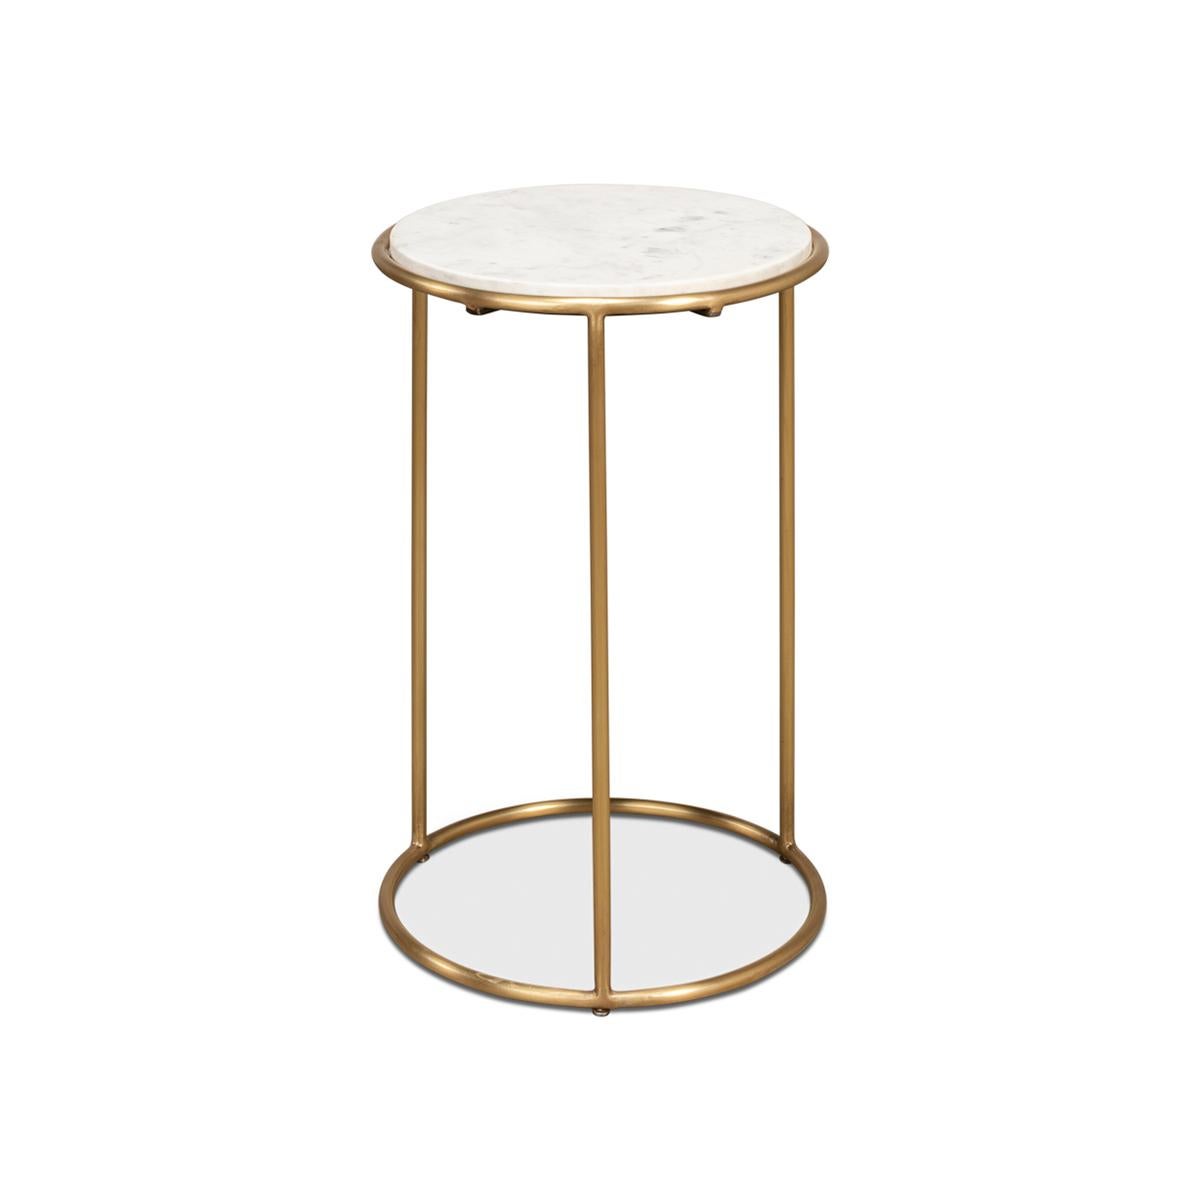 With an inset white marble top, and a brass modern open cylindrical form base.

Dimensions: 14